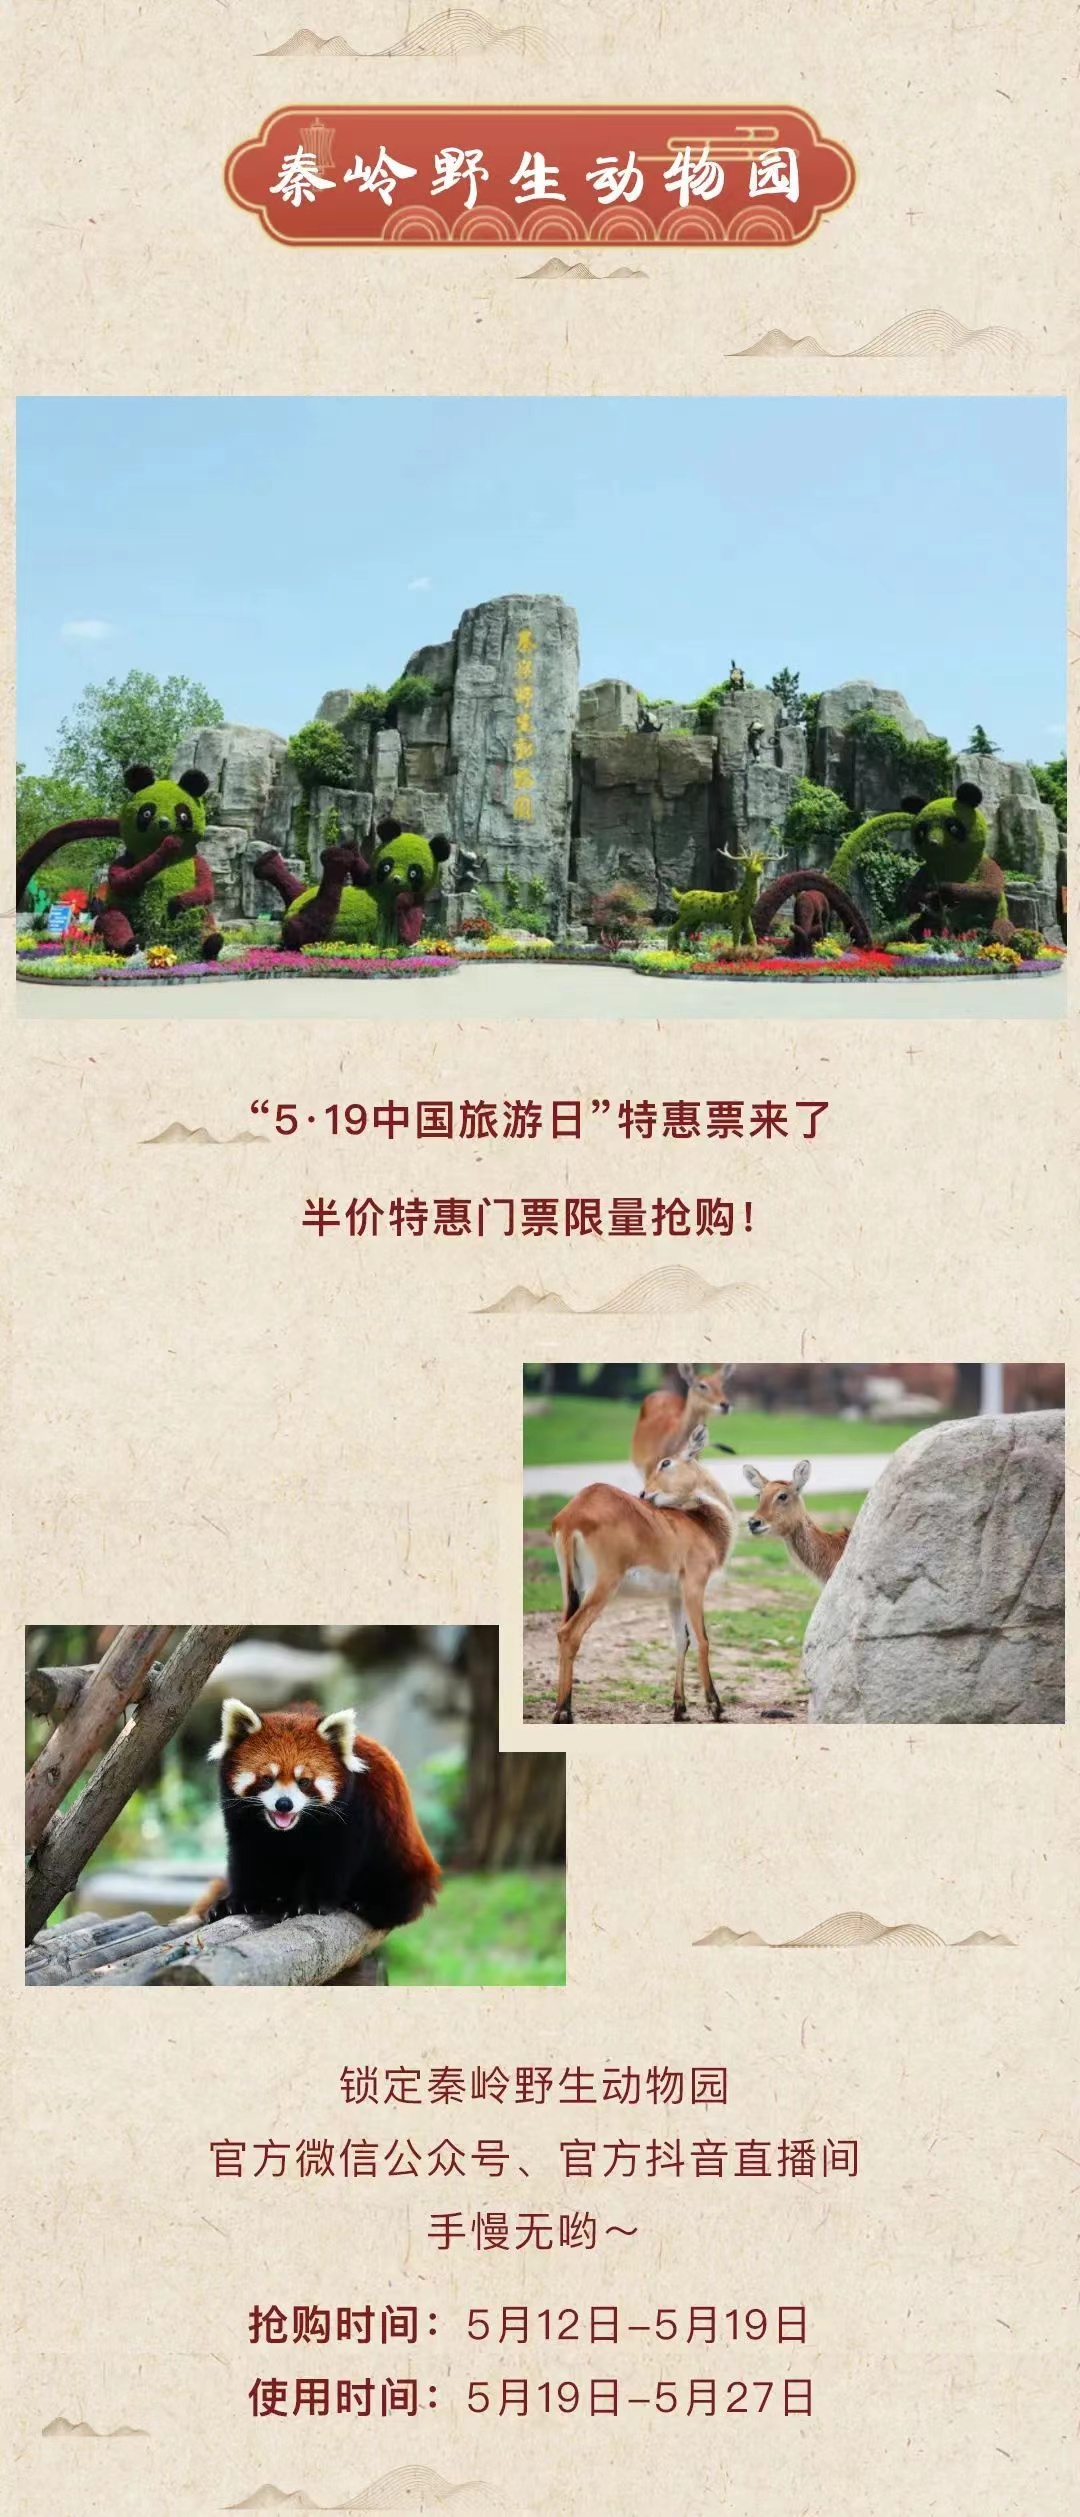 More than 20 cultural and tourism units in Xi'an, including Bailuyuan Film and Television City, Yisushe Cultural District, Huaqing Palace, Huaxia Cultural Tourism Resort, Qinling National Botanical Garden, Kunming Chi·Qixi Park, Hanjing Emperor Yangling Museum, etc., provide 20 preferential benefits and offer free punch-in 9 points to meet the differentiated needs of tourists.